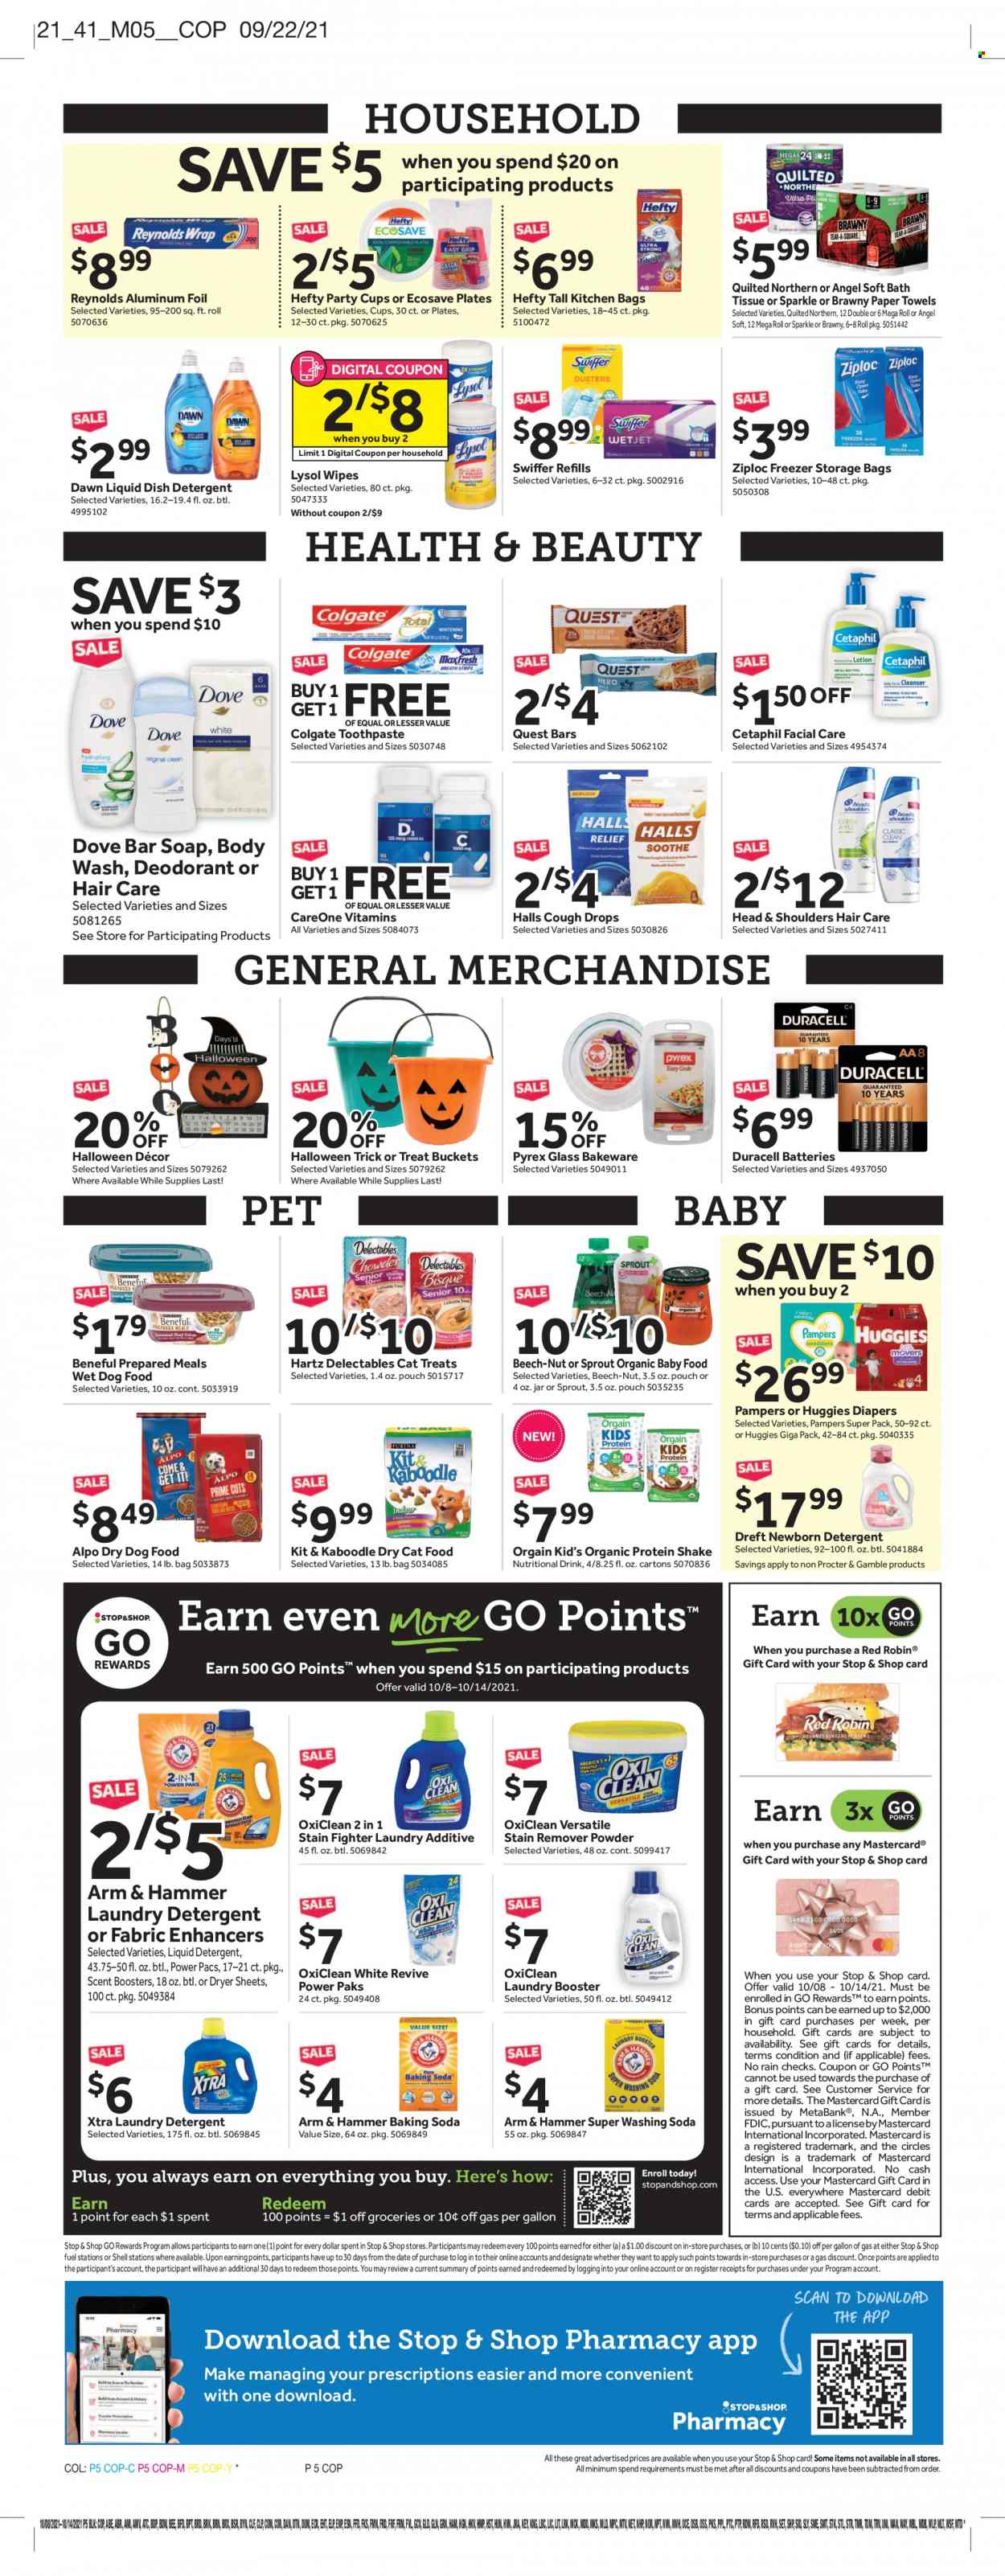 thumbnail - Stop & Shop Flyer - 10/08/2021 - 10/14/2021 - Sales products - ham, protein drink, shake, Halls, ARM & HAMMER, bicarbonate of soda, organic baby food, wipes, Huggies, Pampers, nappies, bath tissue, Quilted Northern, kitchen towels, paper towels, liquid detergent, laundry detergent, stain remover, OxiClean, dryer sheets, scent booster, XTRA, body wash, Dove, soap bar, soap, Colgate, toothpaste, Head & Shoulders, anti-perspirant, deodorant, aluminium foil, Ziploc, Hefty, storage bag, party cups, battery, Duracell, animal food, cat food, dog food, wet dog food, dry dog food, dry cat food, Alpo, cough drops. Page 5.